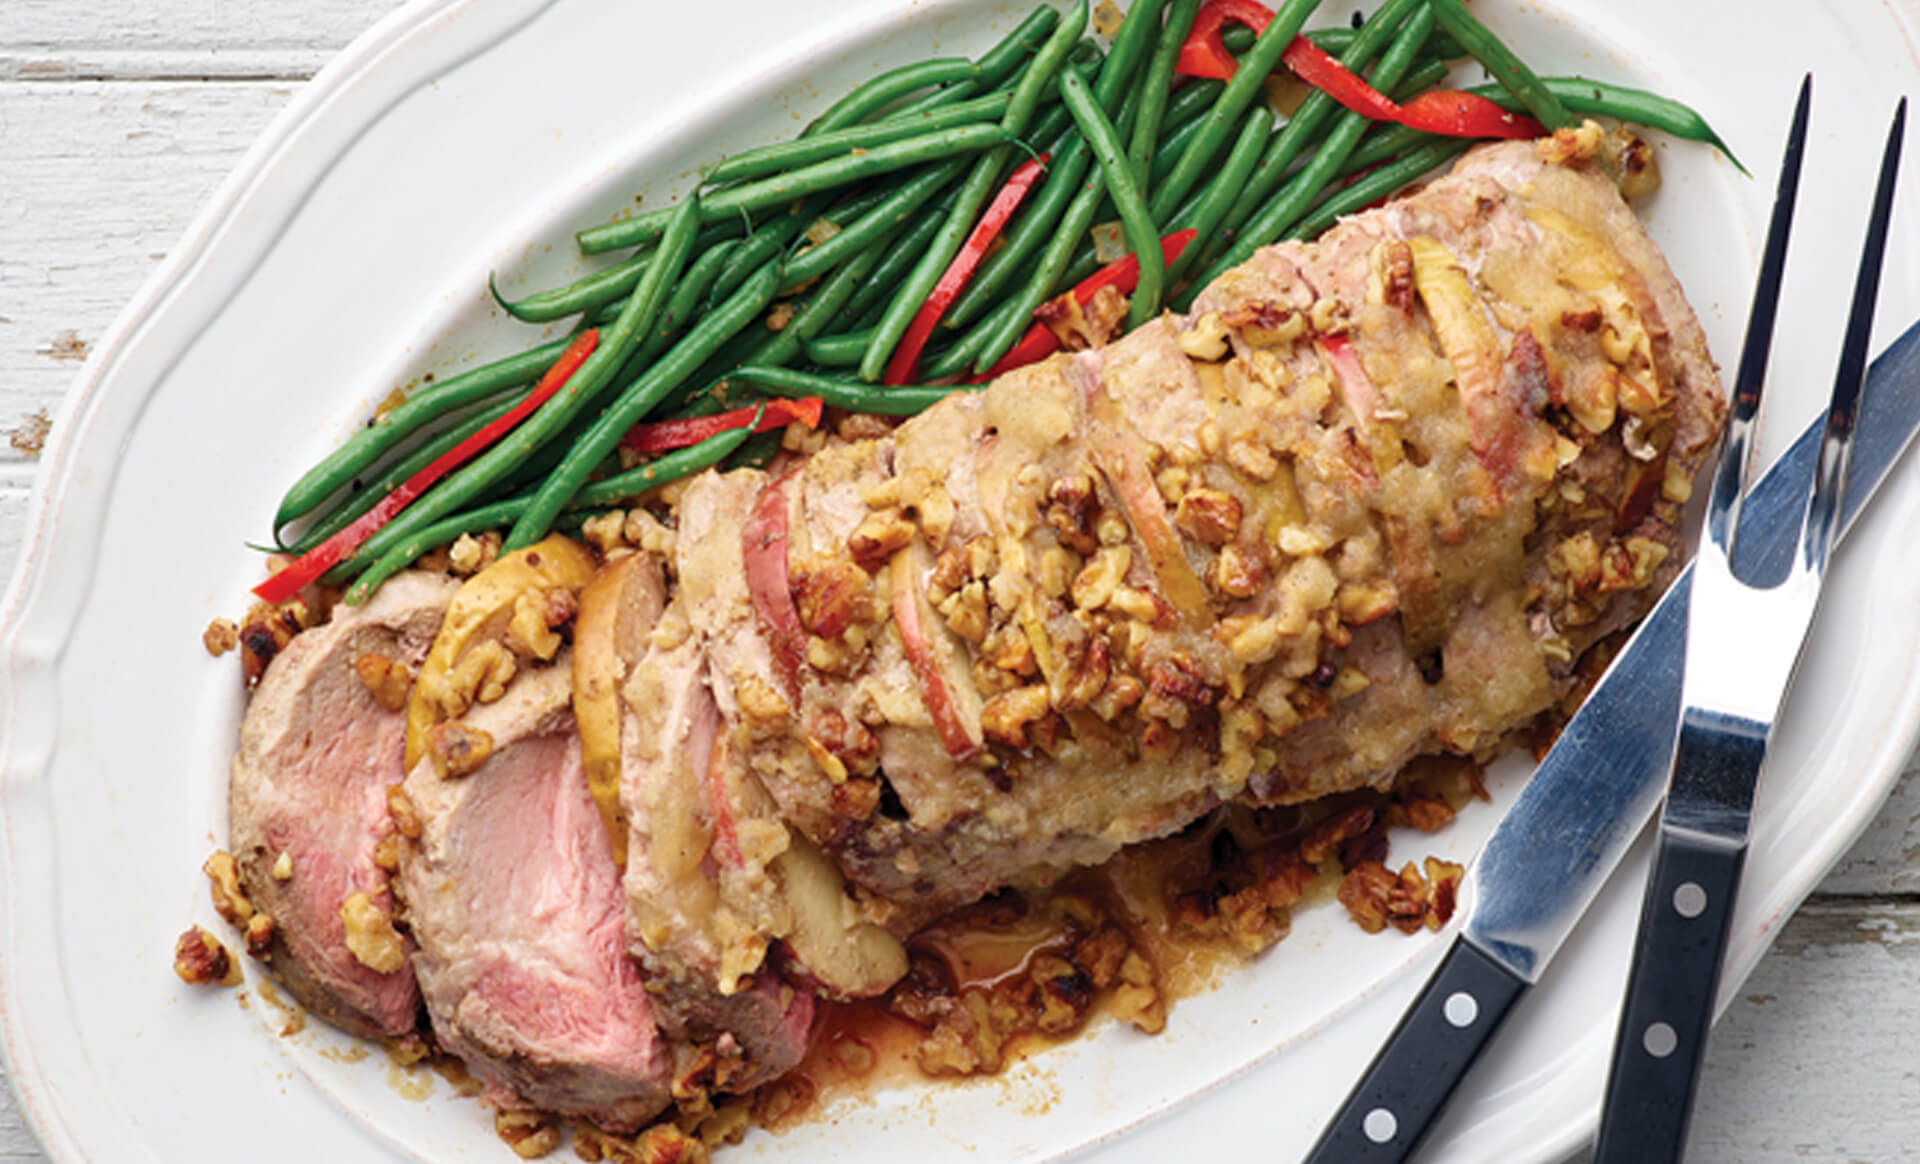 Paleo Friendly Hasselback Pork Tenderloin with Apples and Walnuts